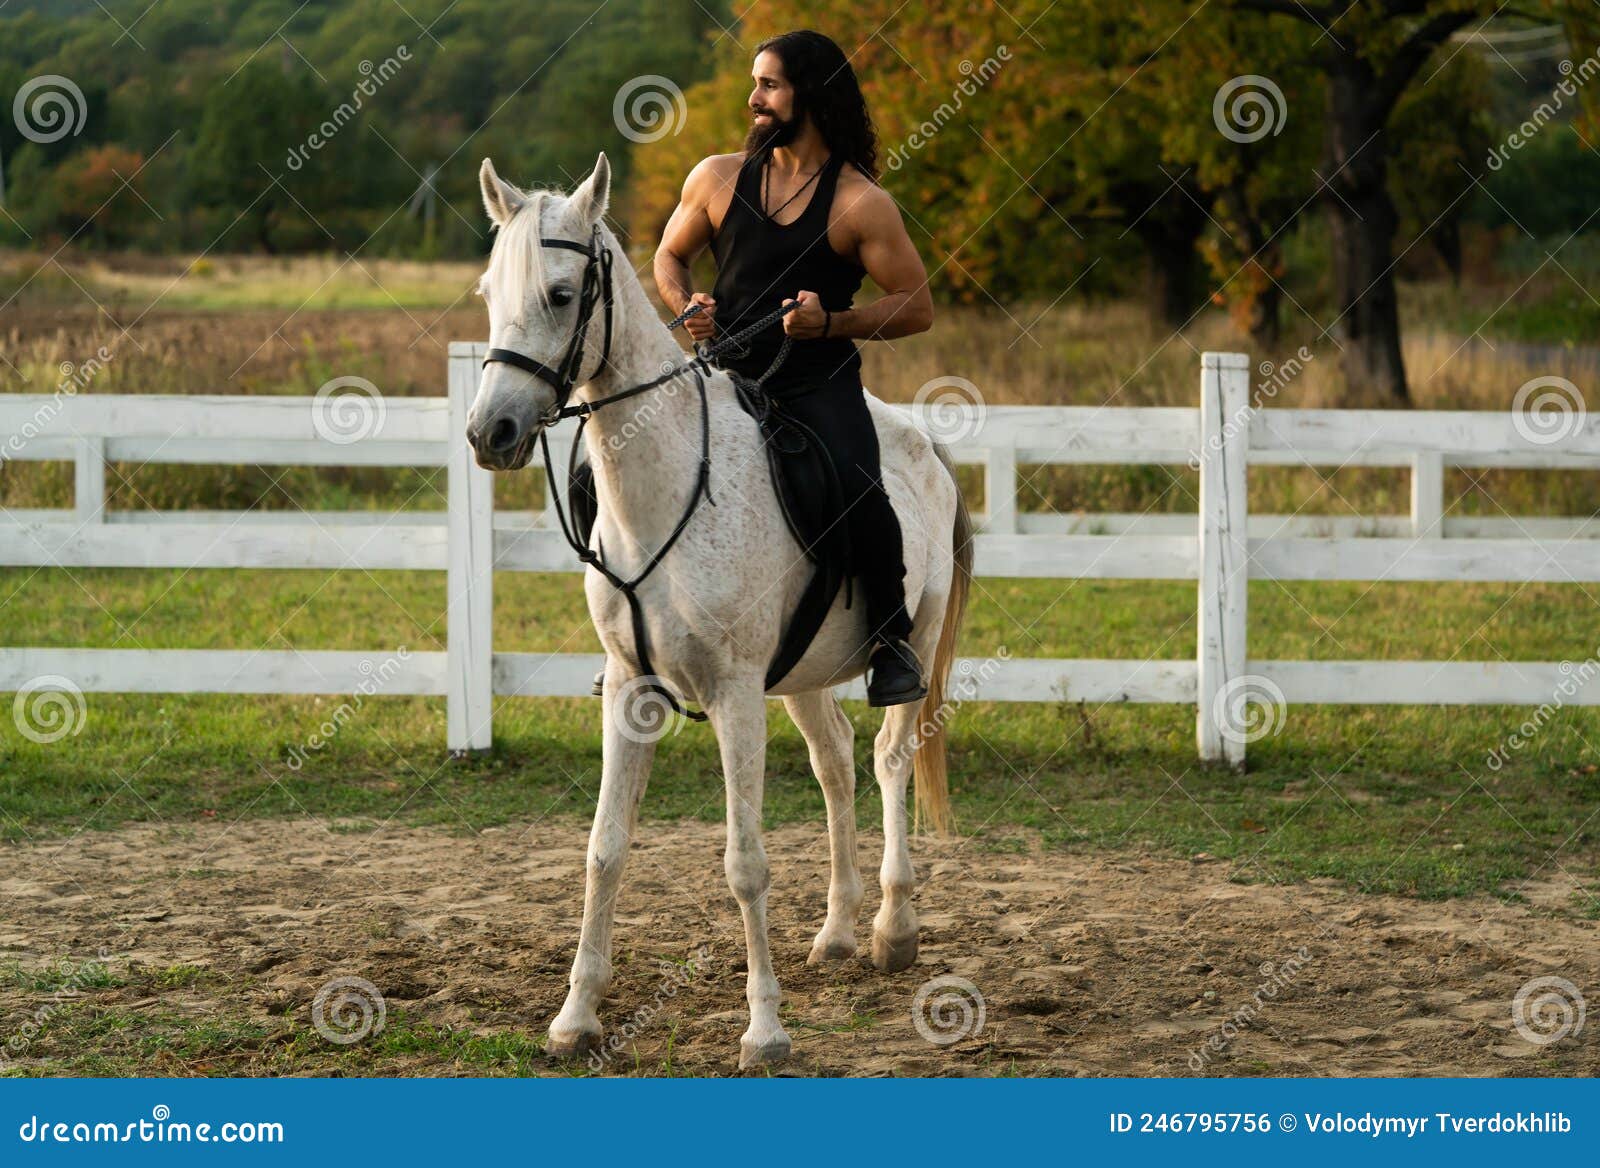 handsome muscular man riding horse. hunky cowboy. young muscular guy in t-shirt on horseback.